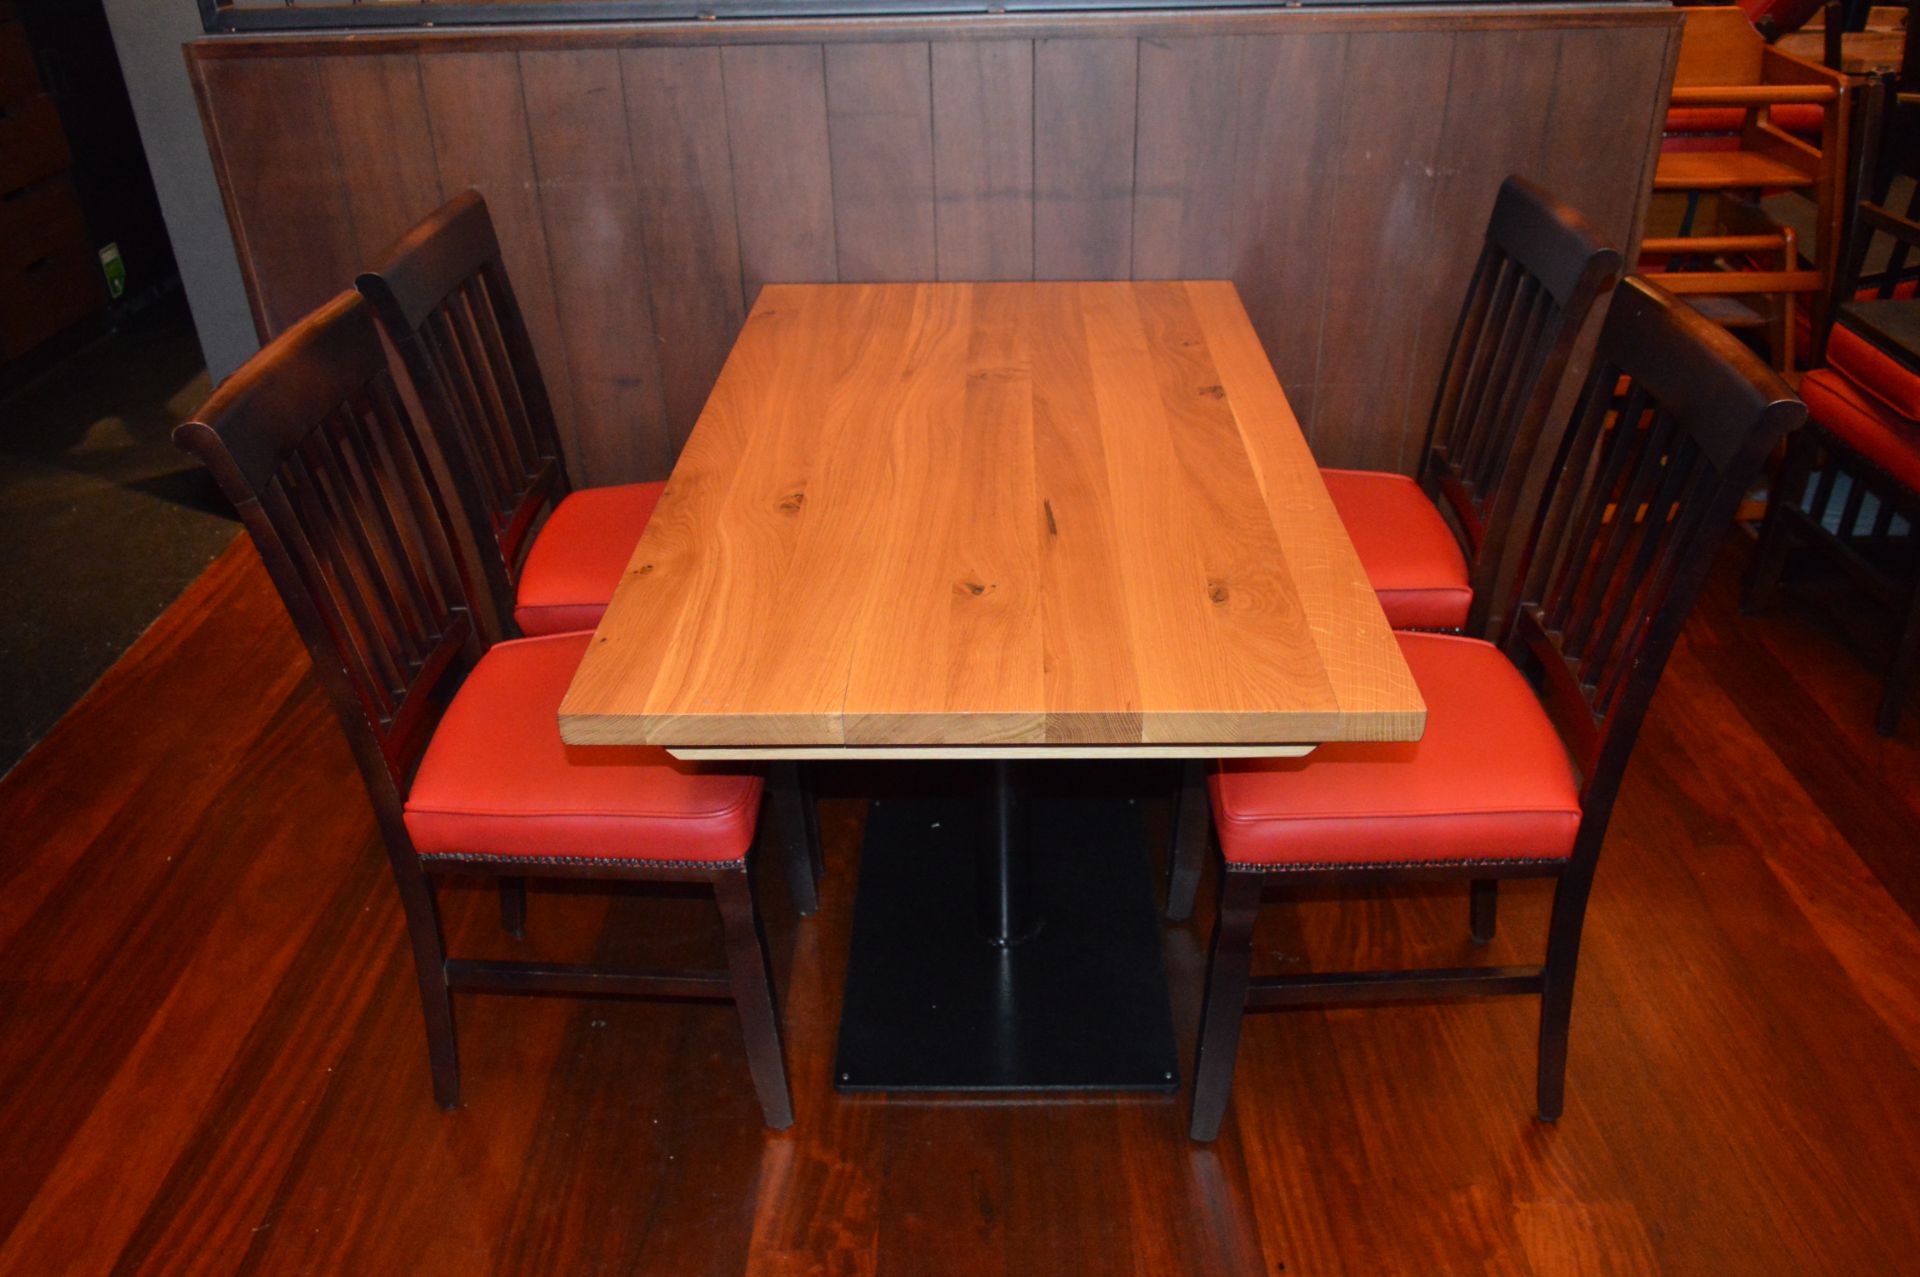 6 x High Back Dining Chairs With Red Leather Seat Cushions and Studded Detail - Hardwoord Frames - - Image 2 of 4